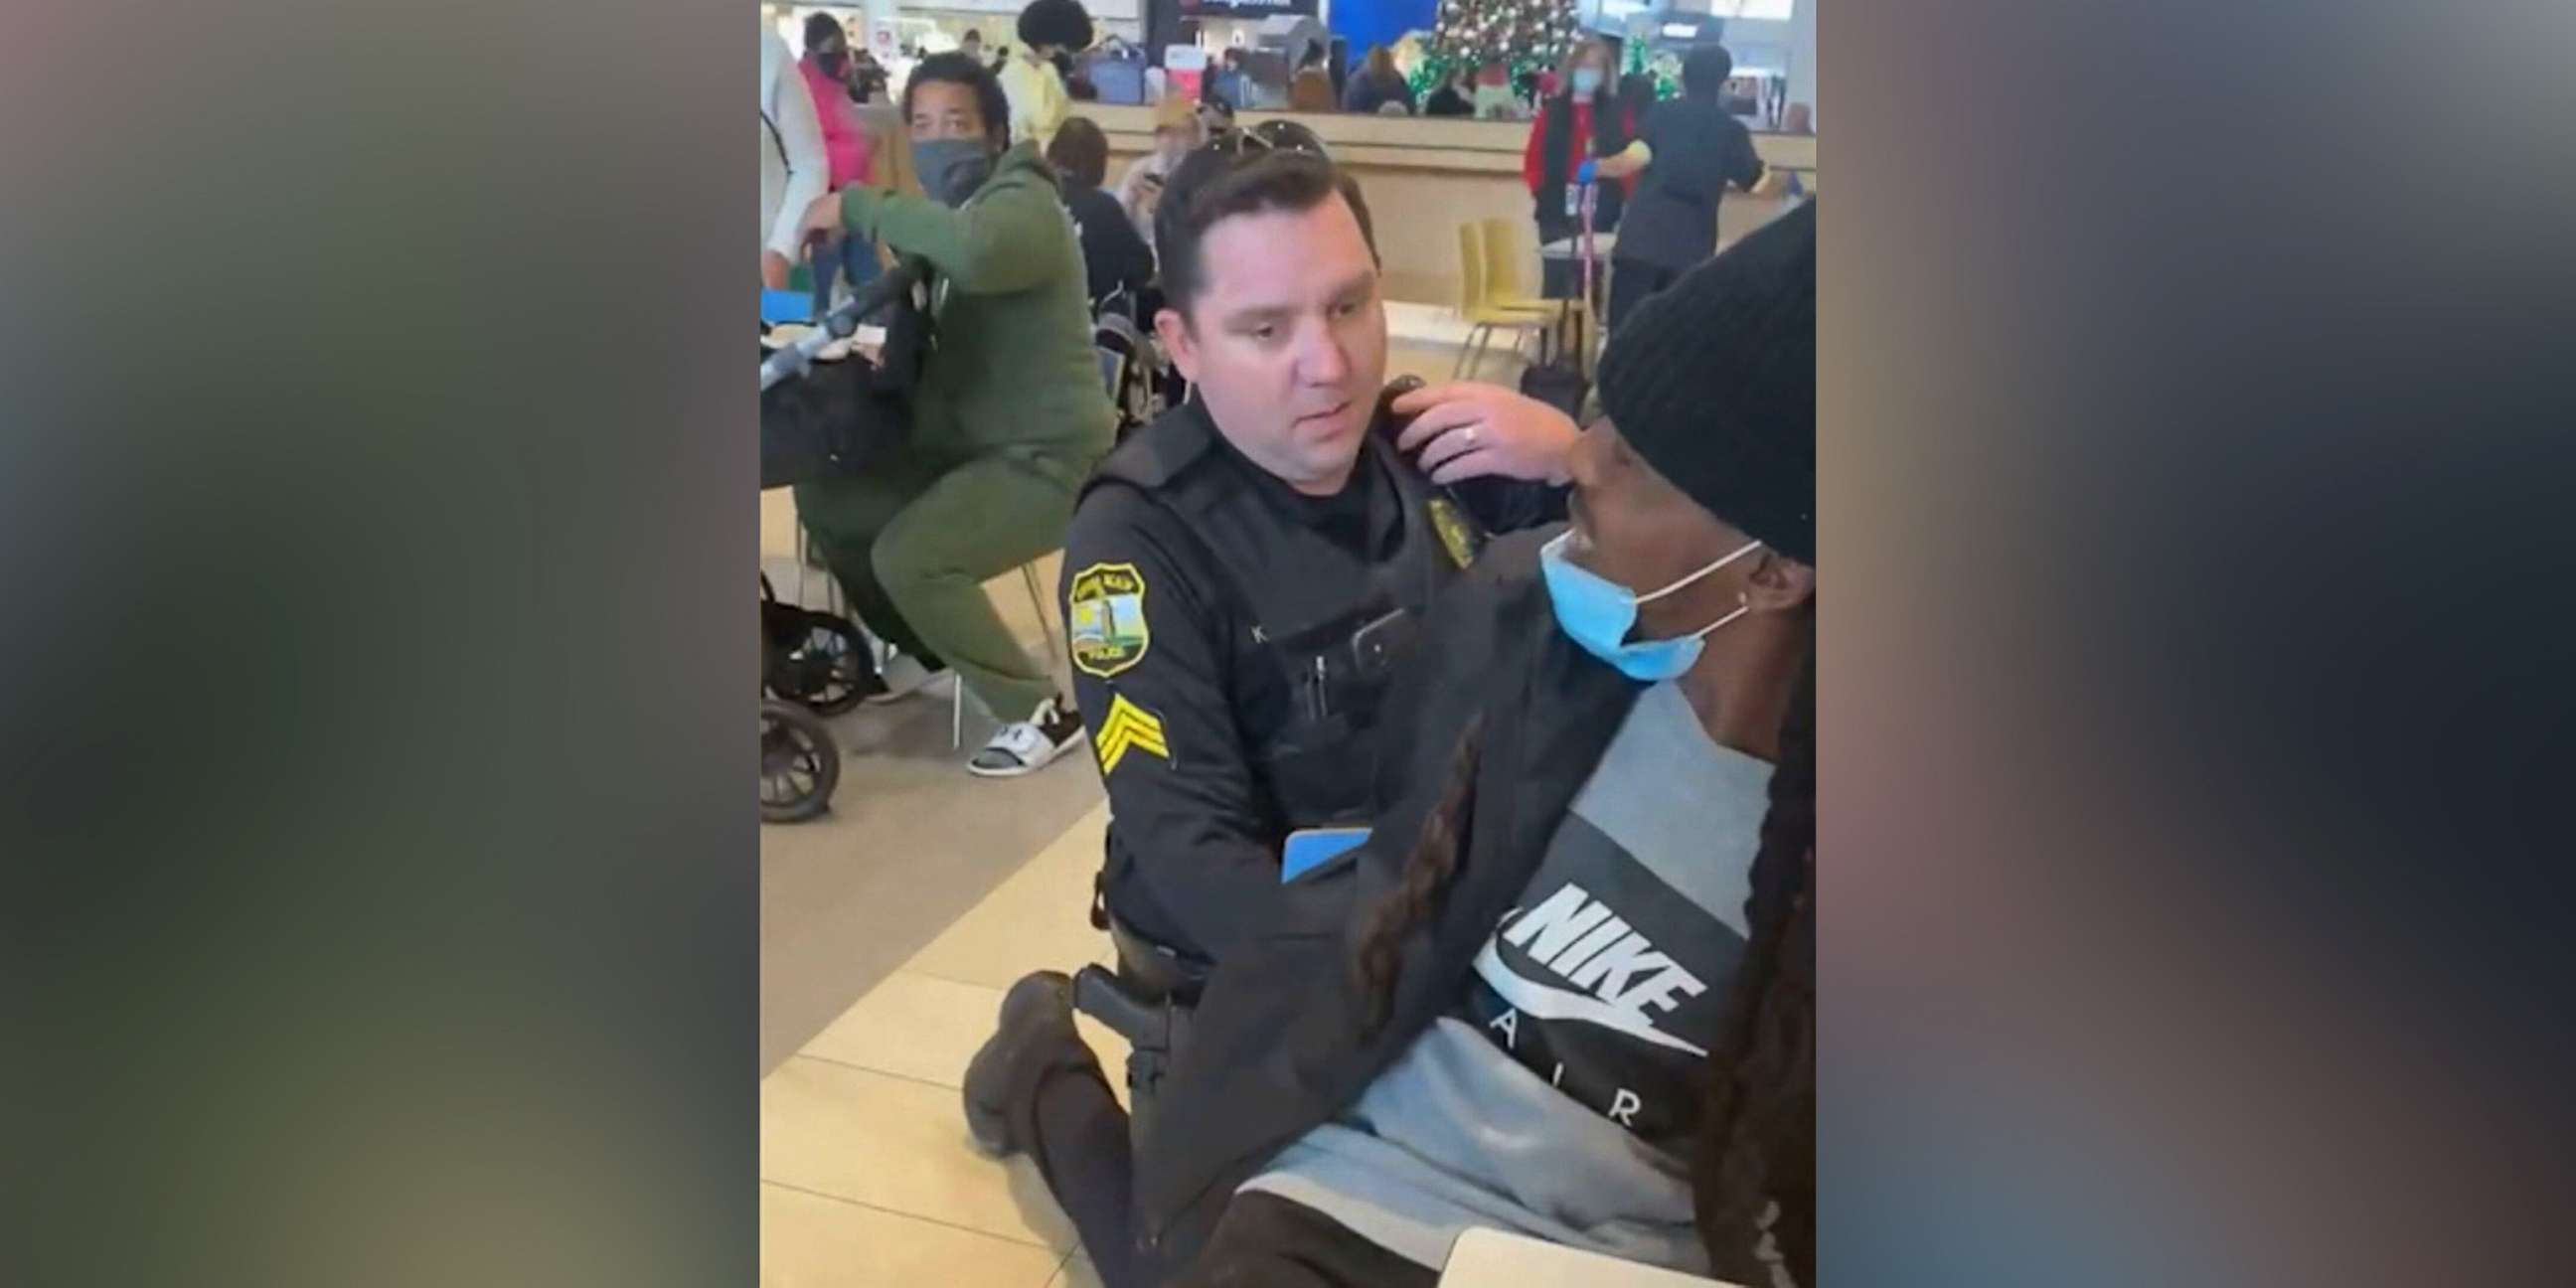 PHOTO: Jamar Mackey is put in handcuffs while eating with his fiancee and their 13-year-old son in the food court at a shopping mall in Virginia Beach, Va., Dec. 19, 2020, after he was mistaken for a suspect in a credit card theft.